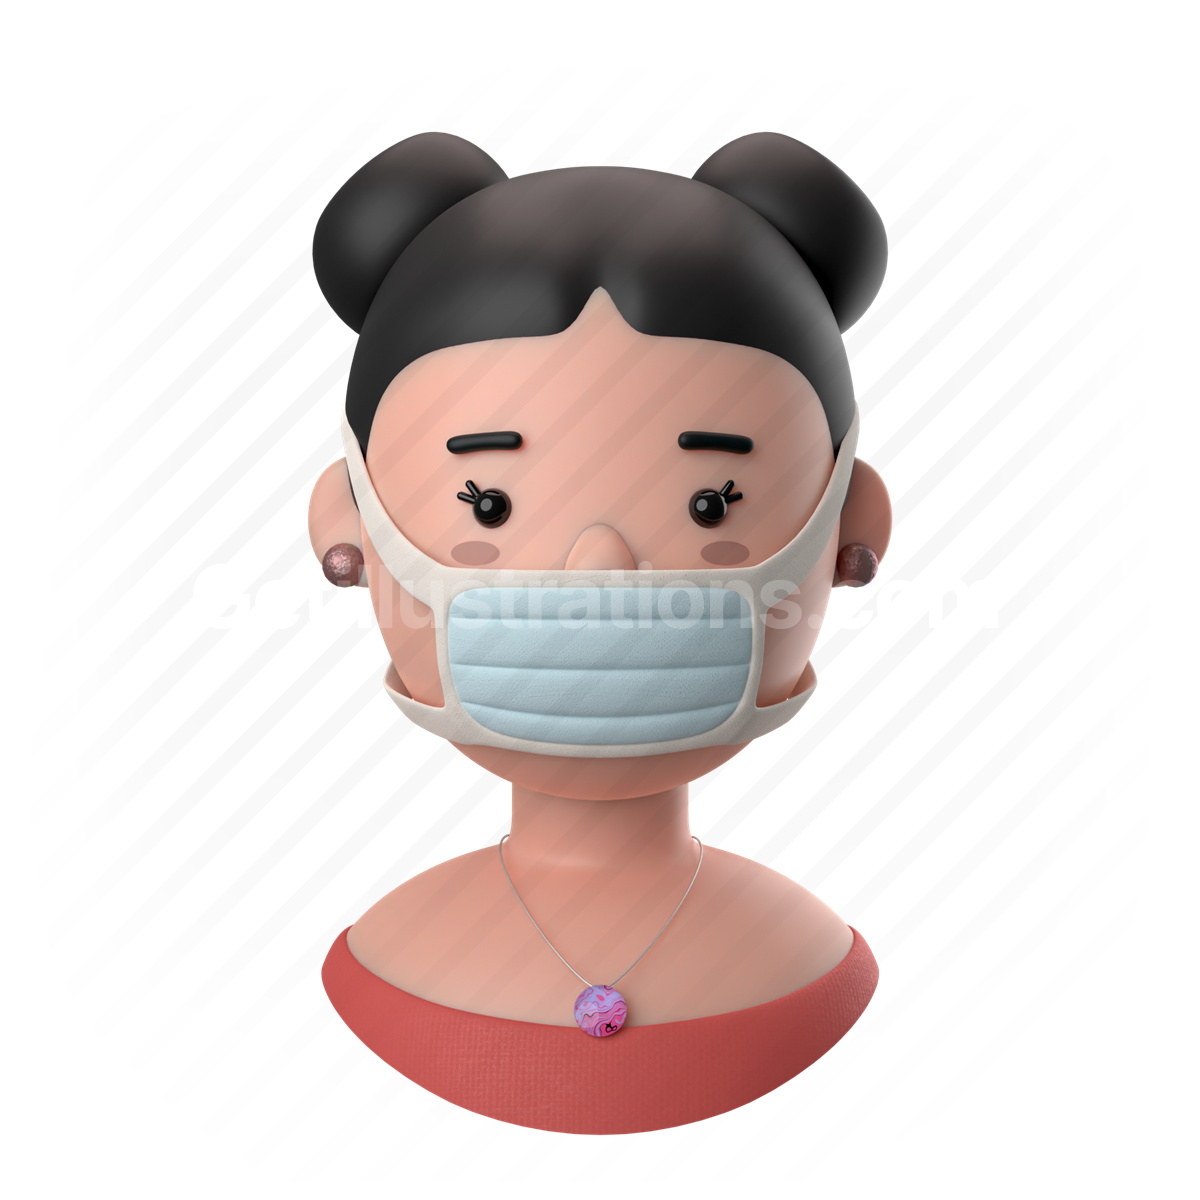 woman, female, person, people, face mask, mask, earrings, necklace, buns